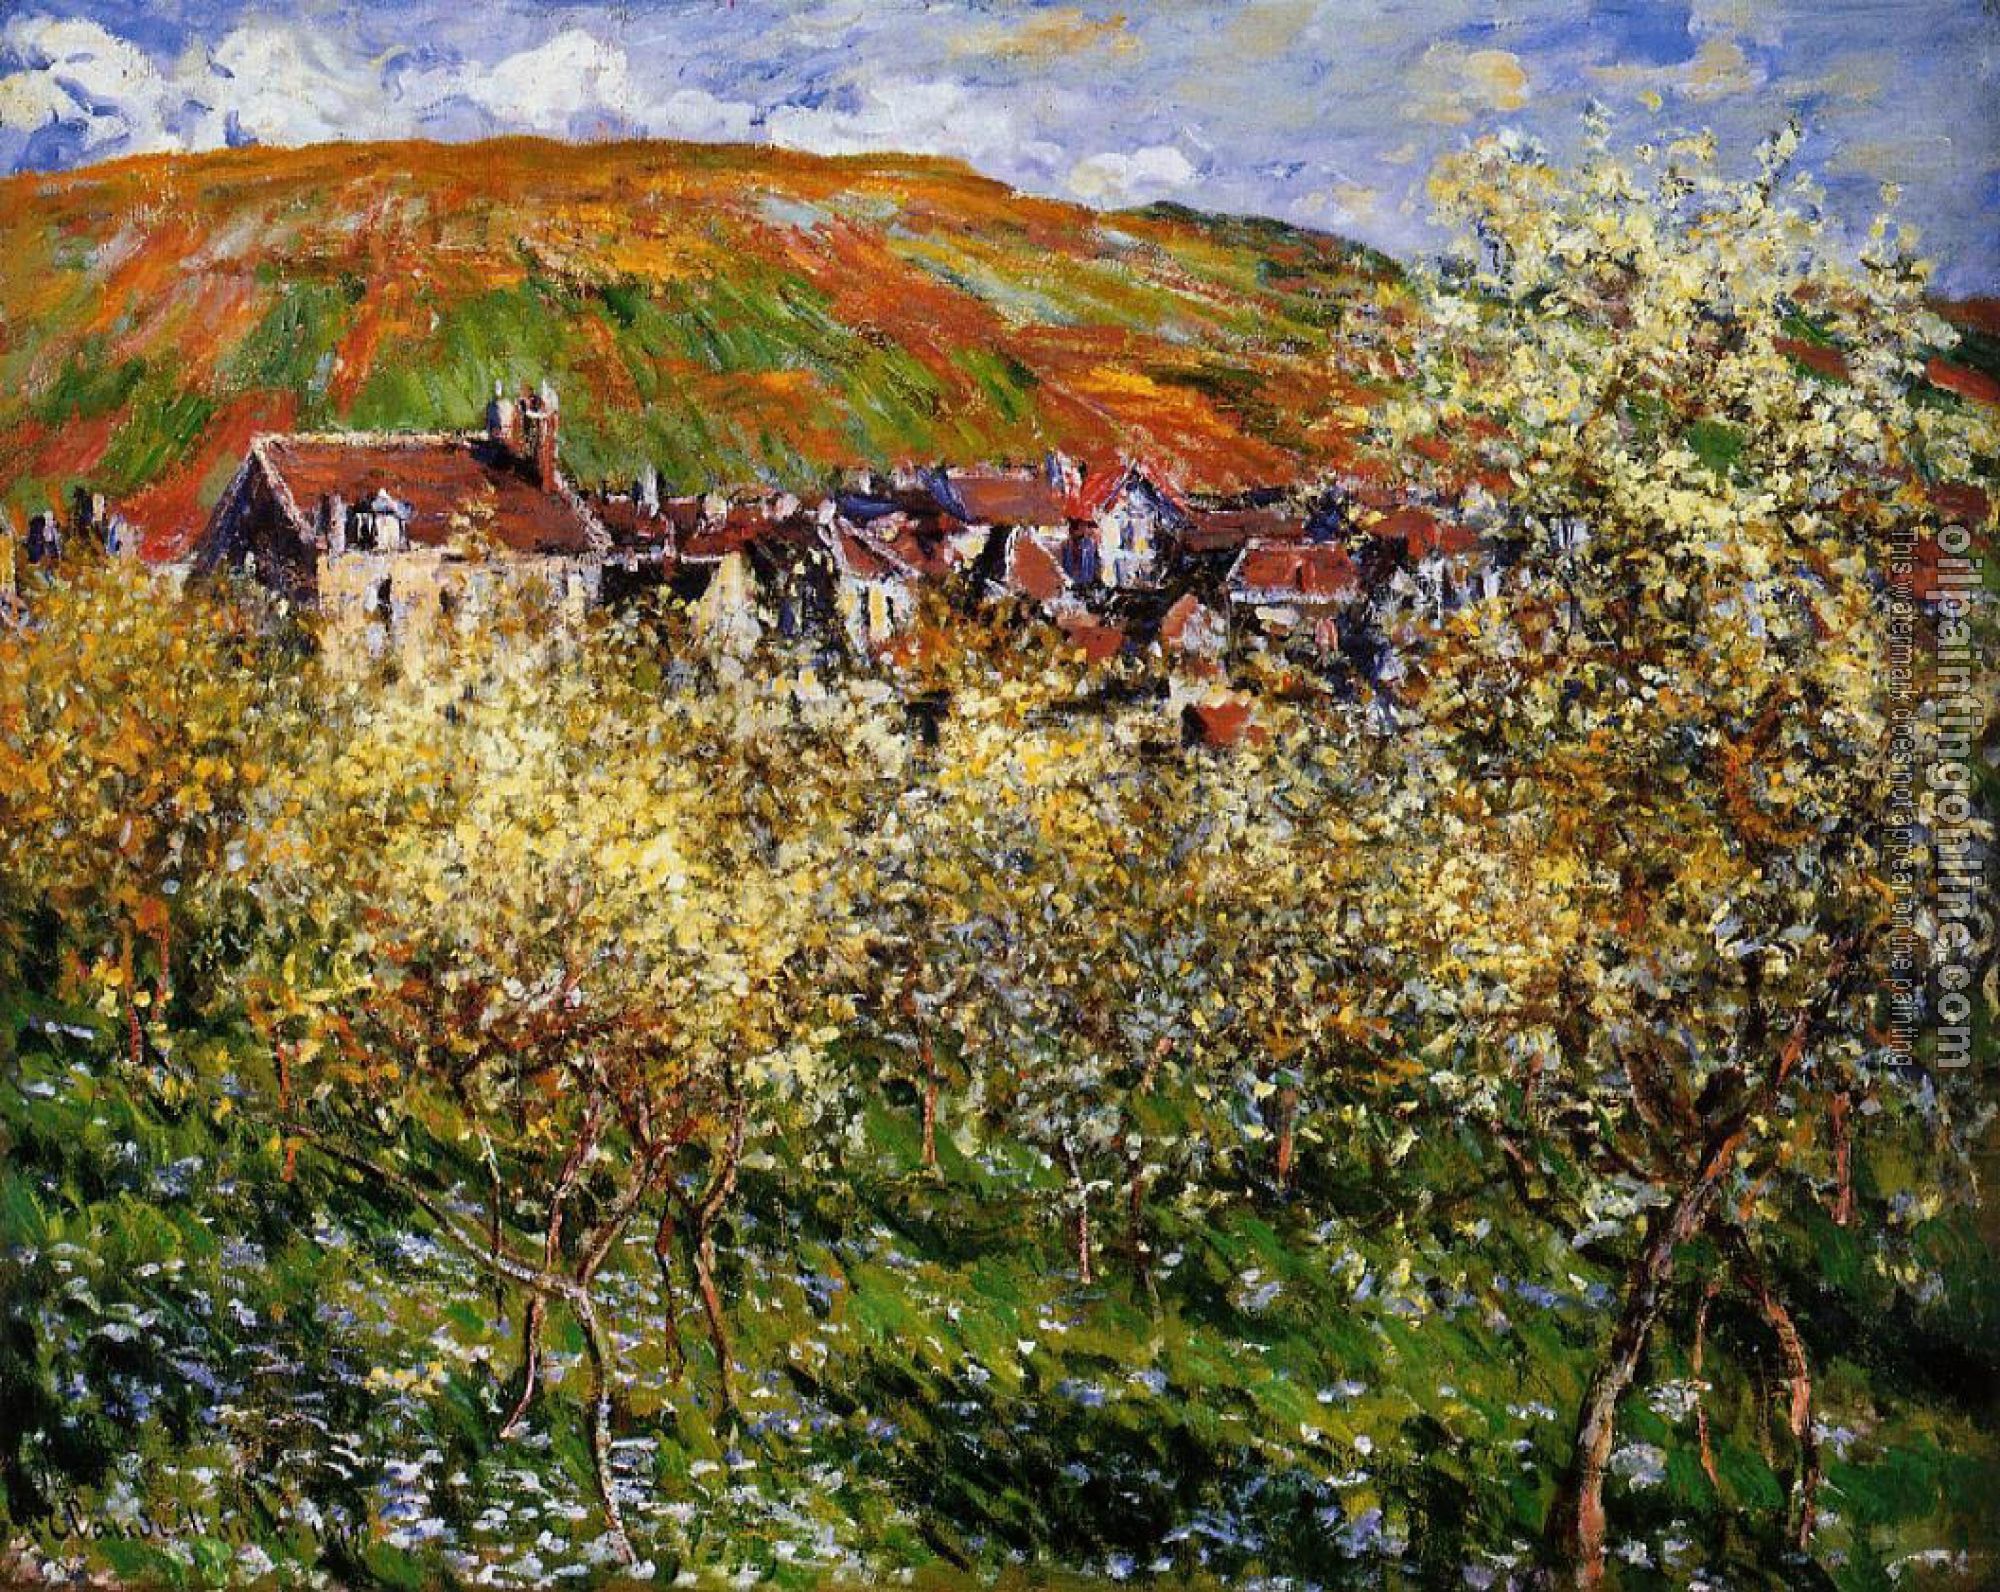 Monet, Claude Oscar - Plum Trees in Blossom at Vetheuil